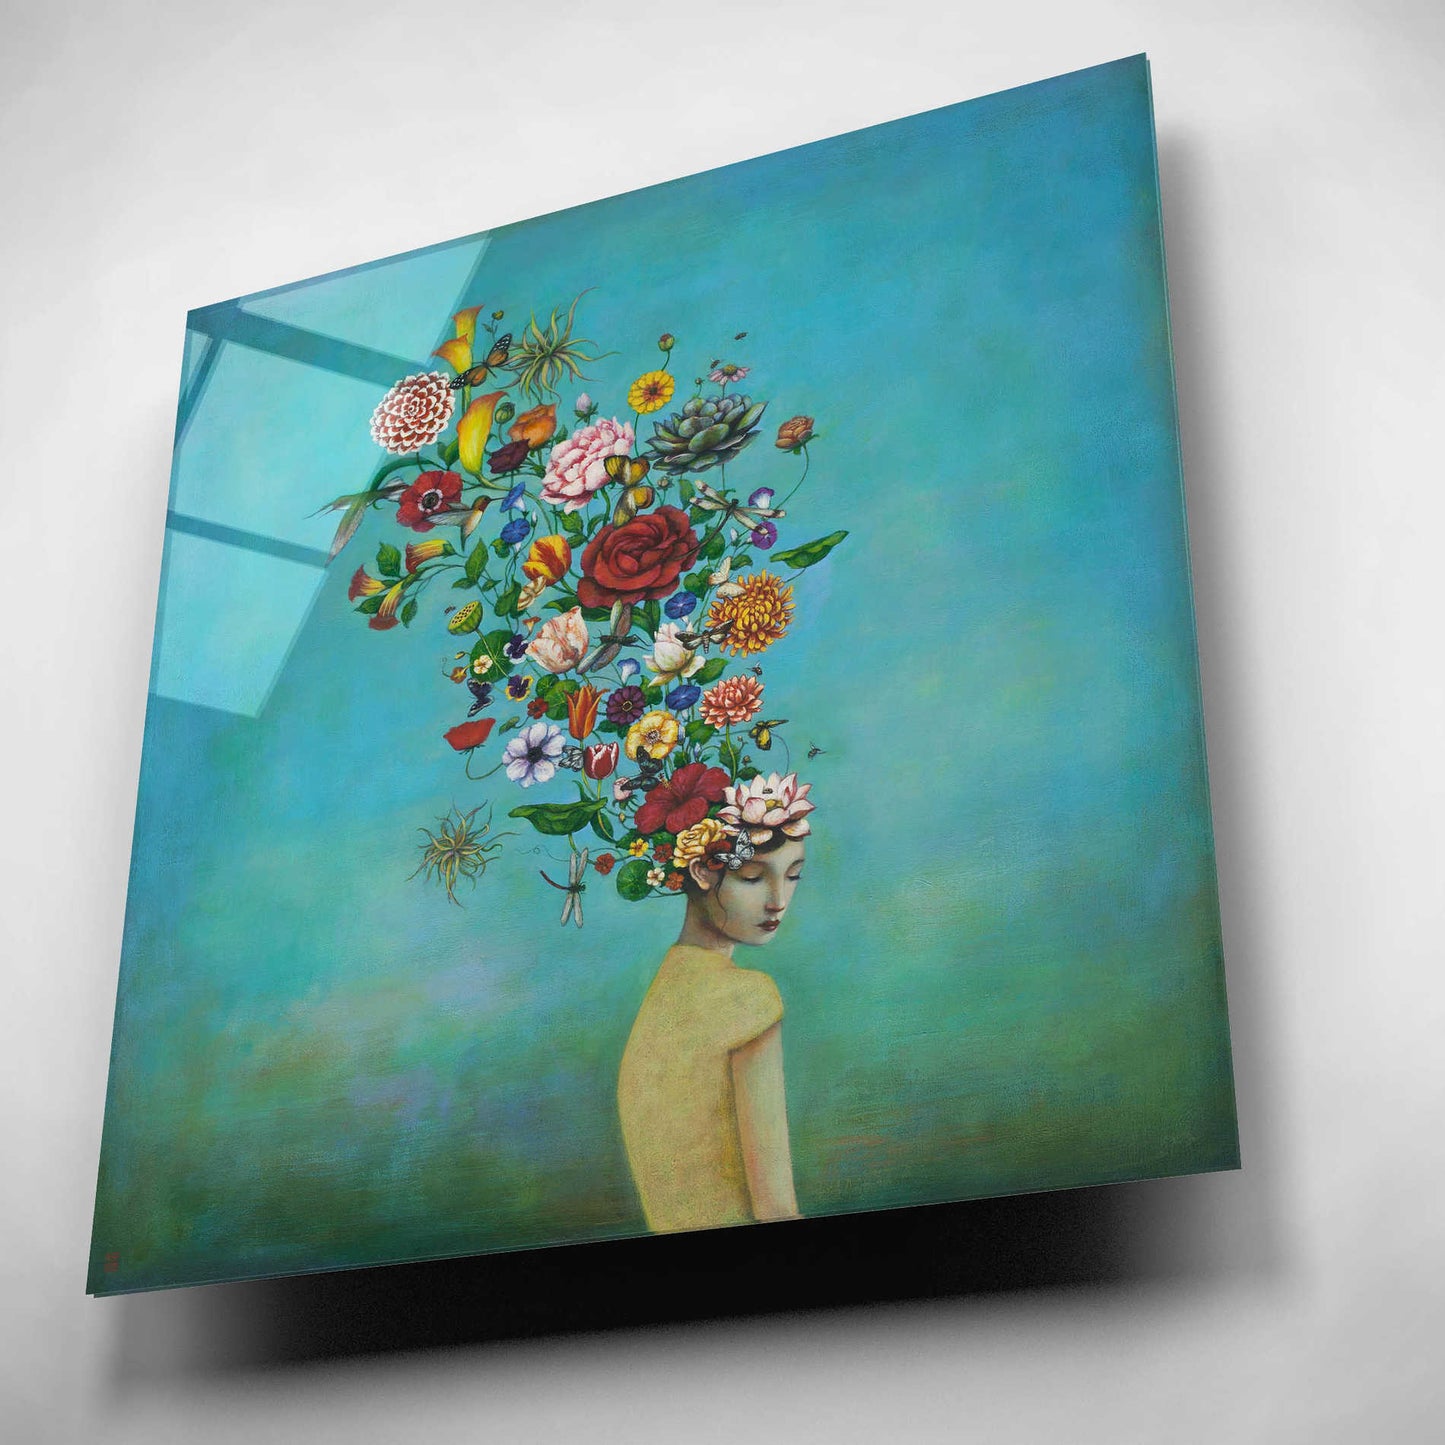 Epic Art 'A Mindful Garden' by Duy Huynh, Acrylic Glass Wall Art,12x12